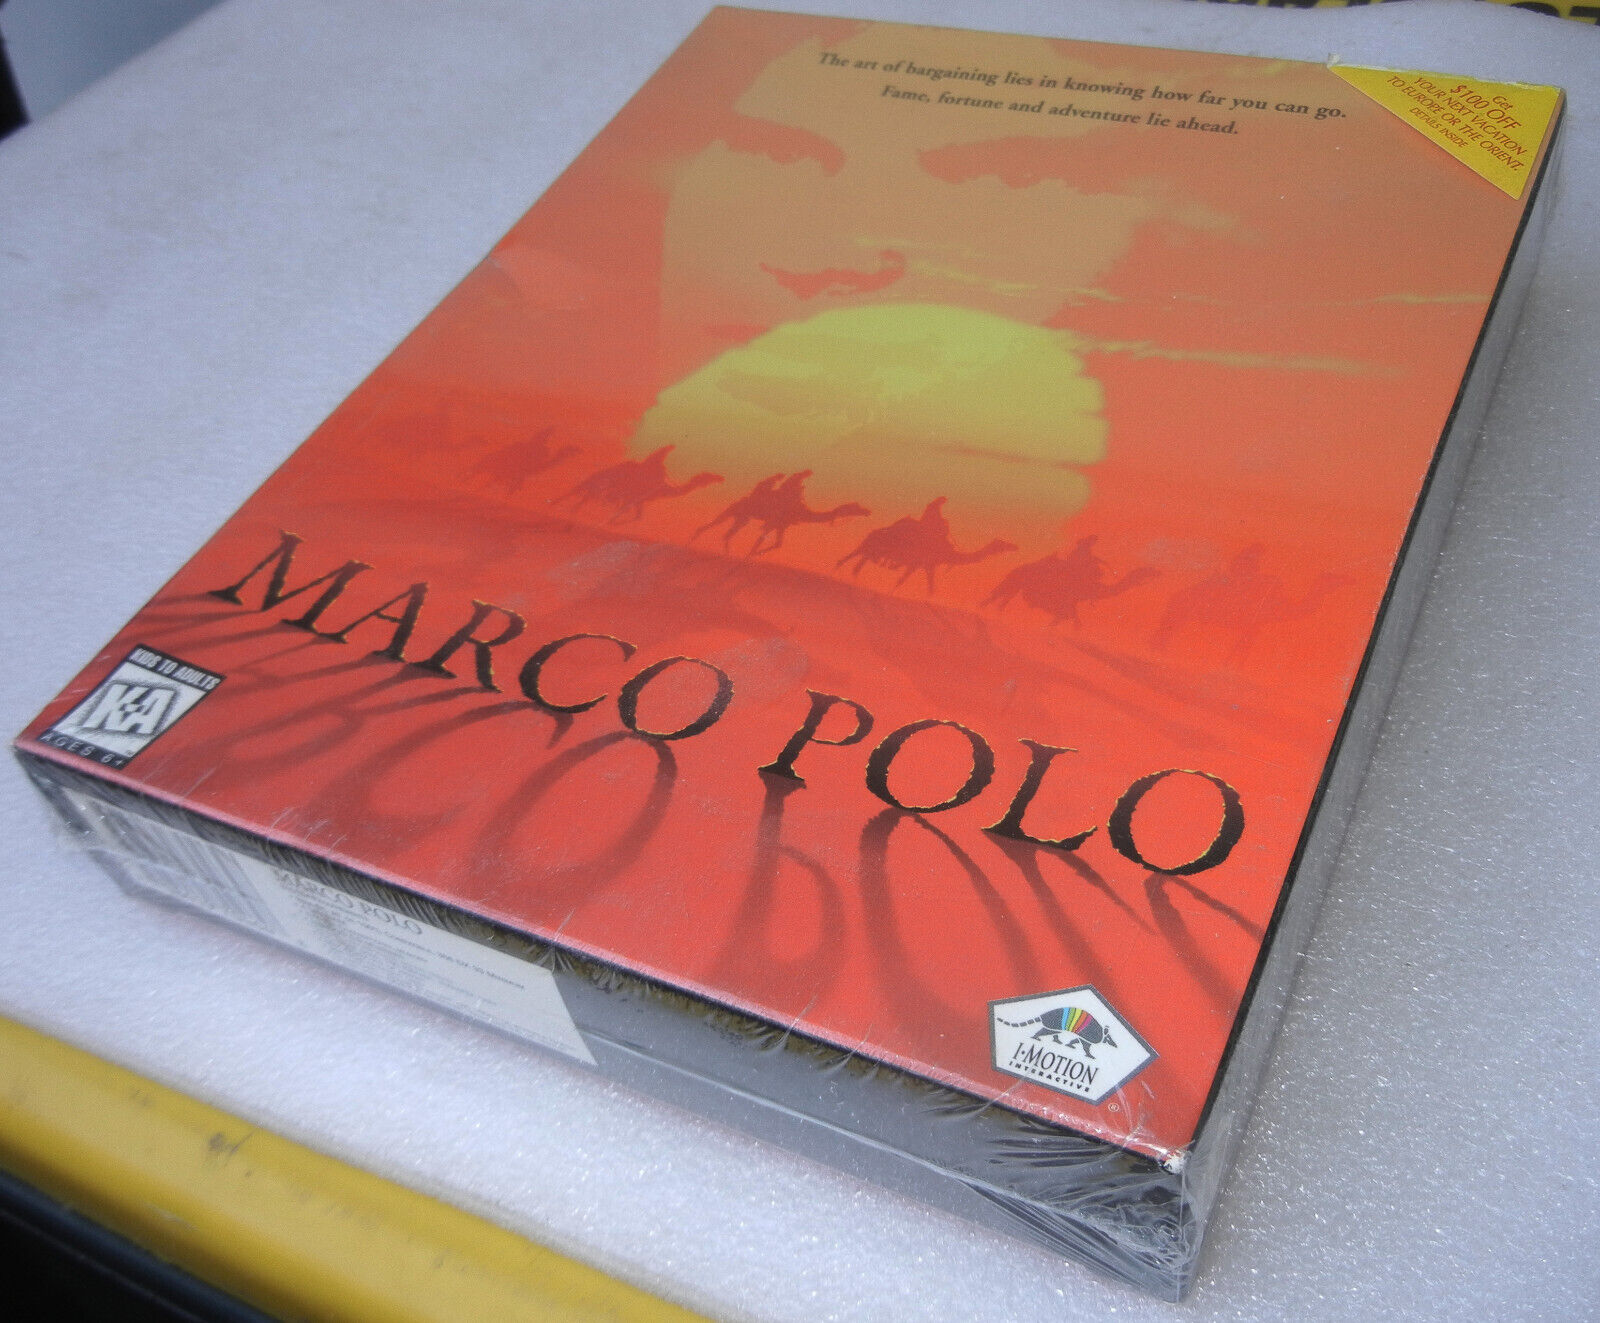 Marco Polo (1995) Vintage Large Retail Boxed PC Computer Game - NEW